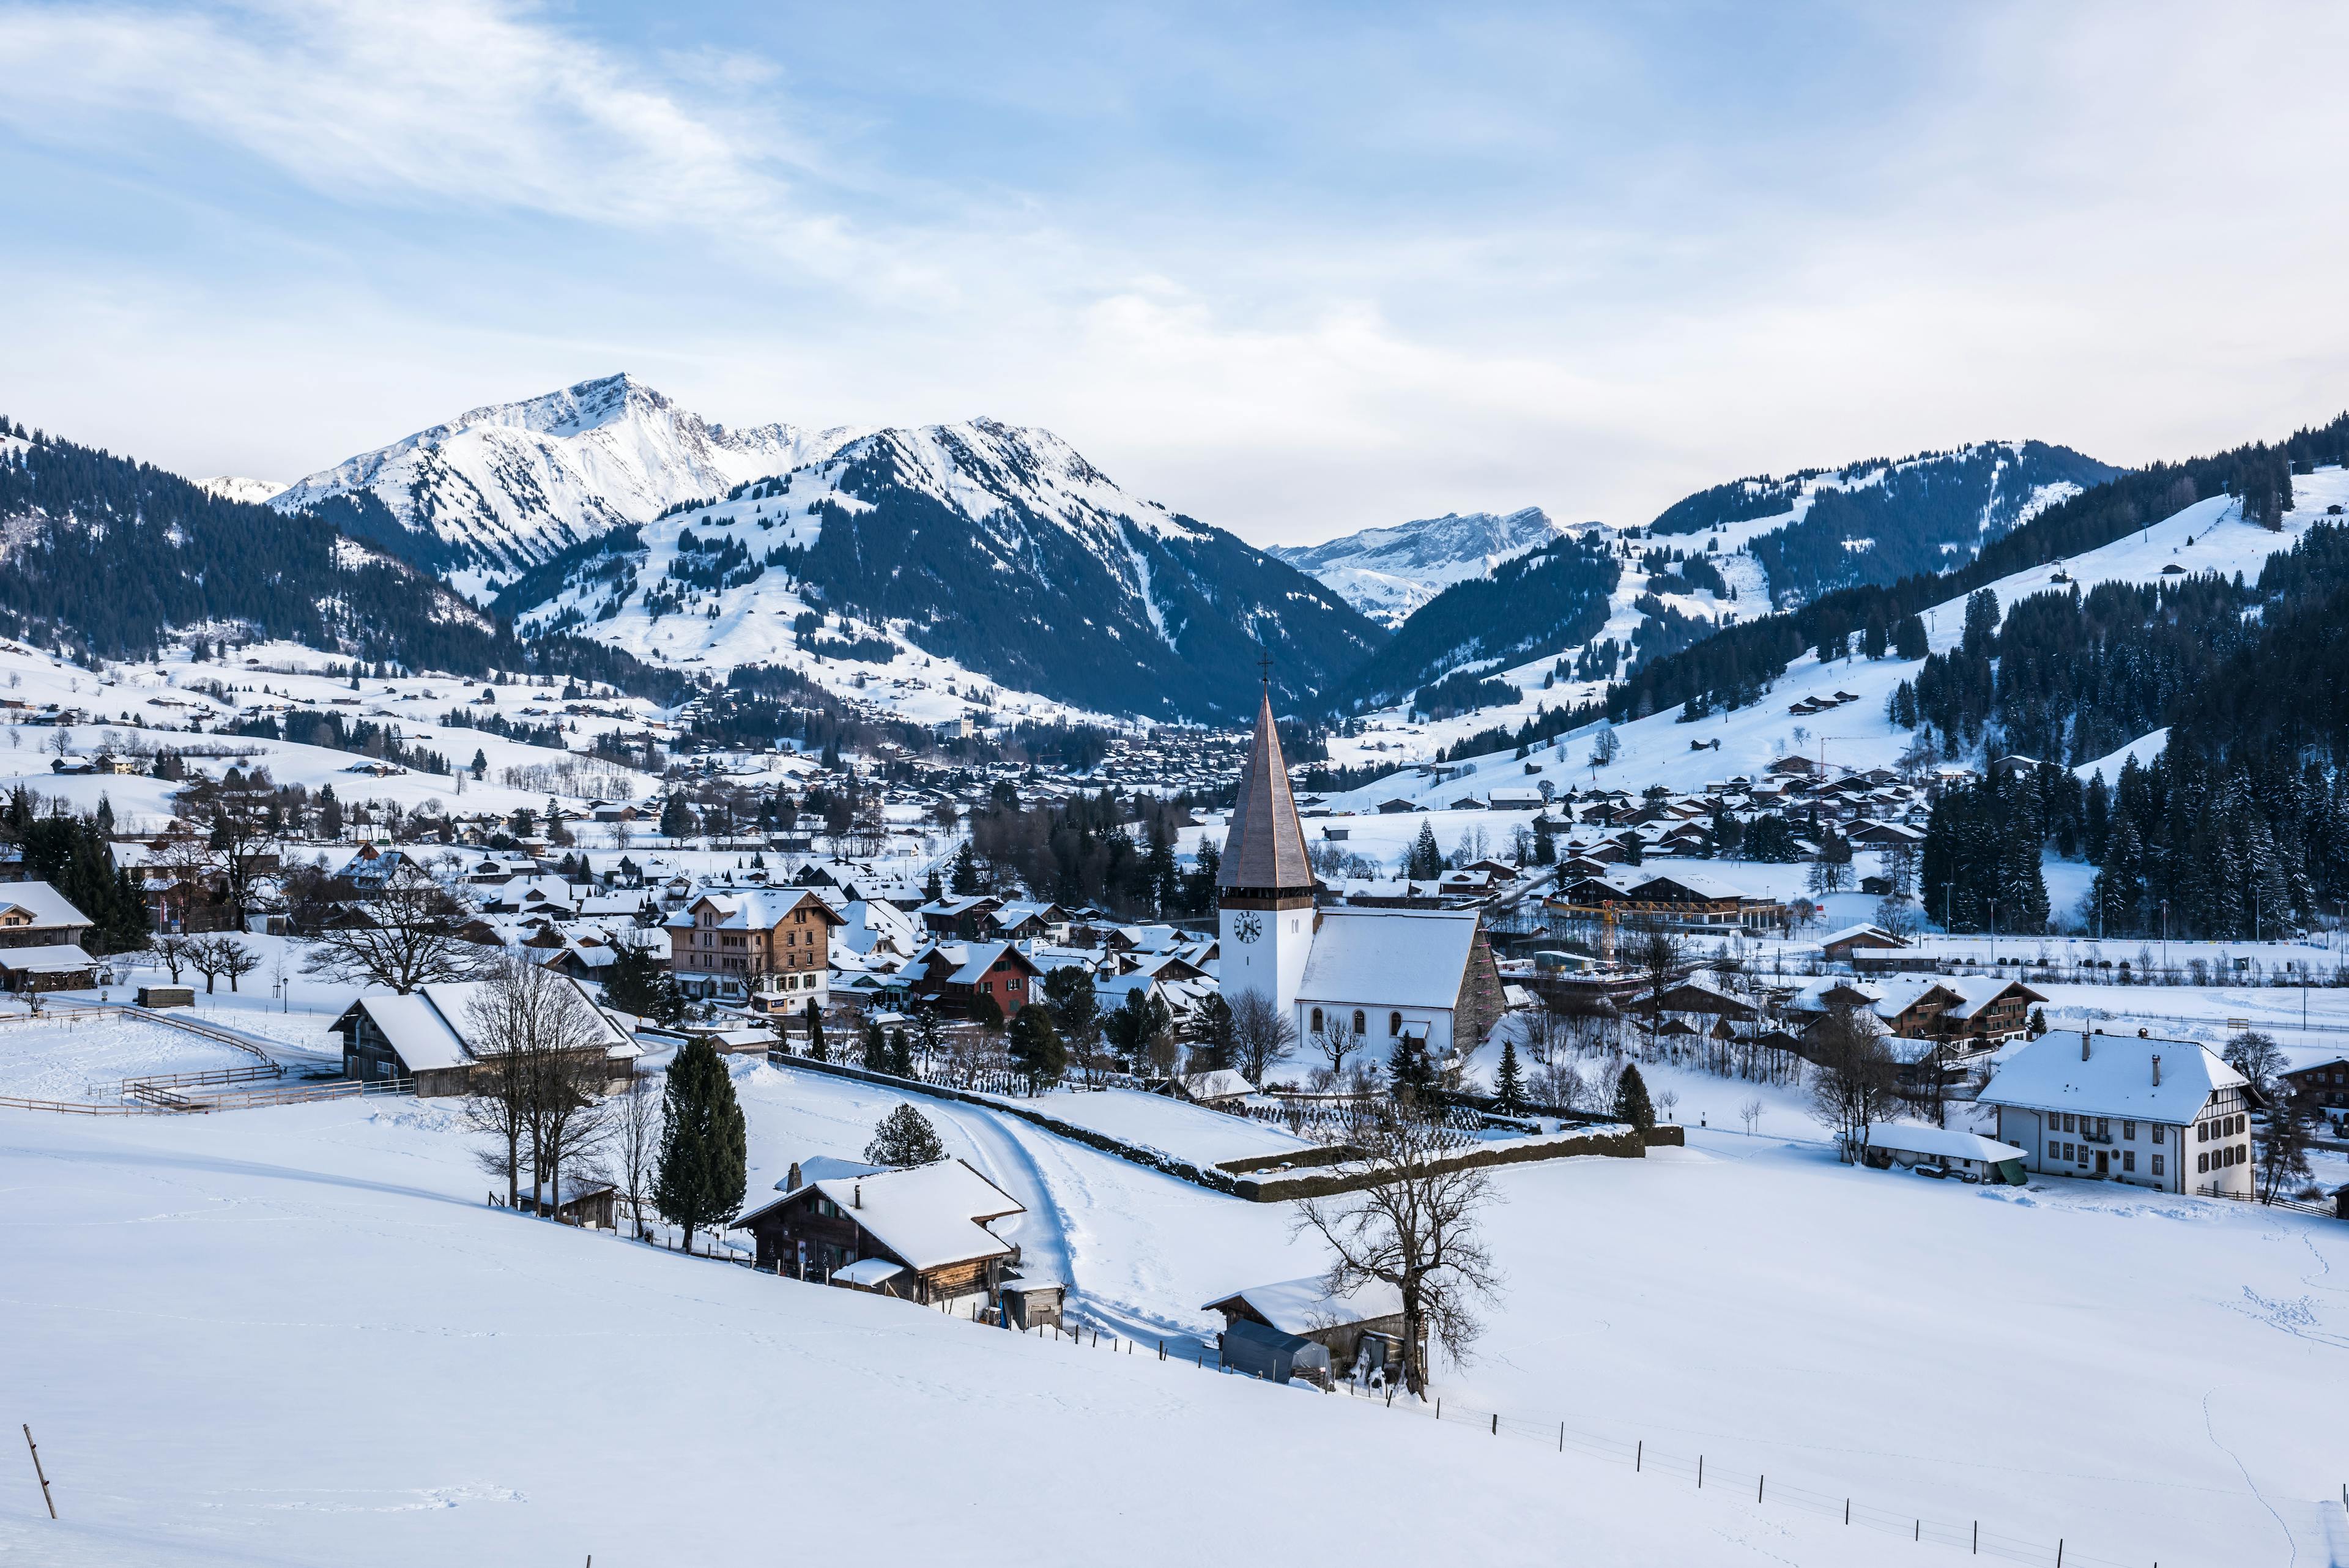 Snowy landscape of Gstaad